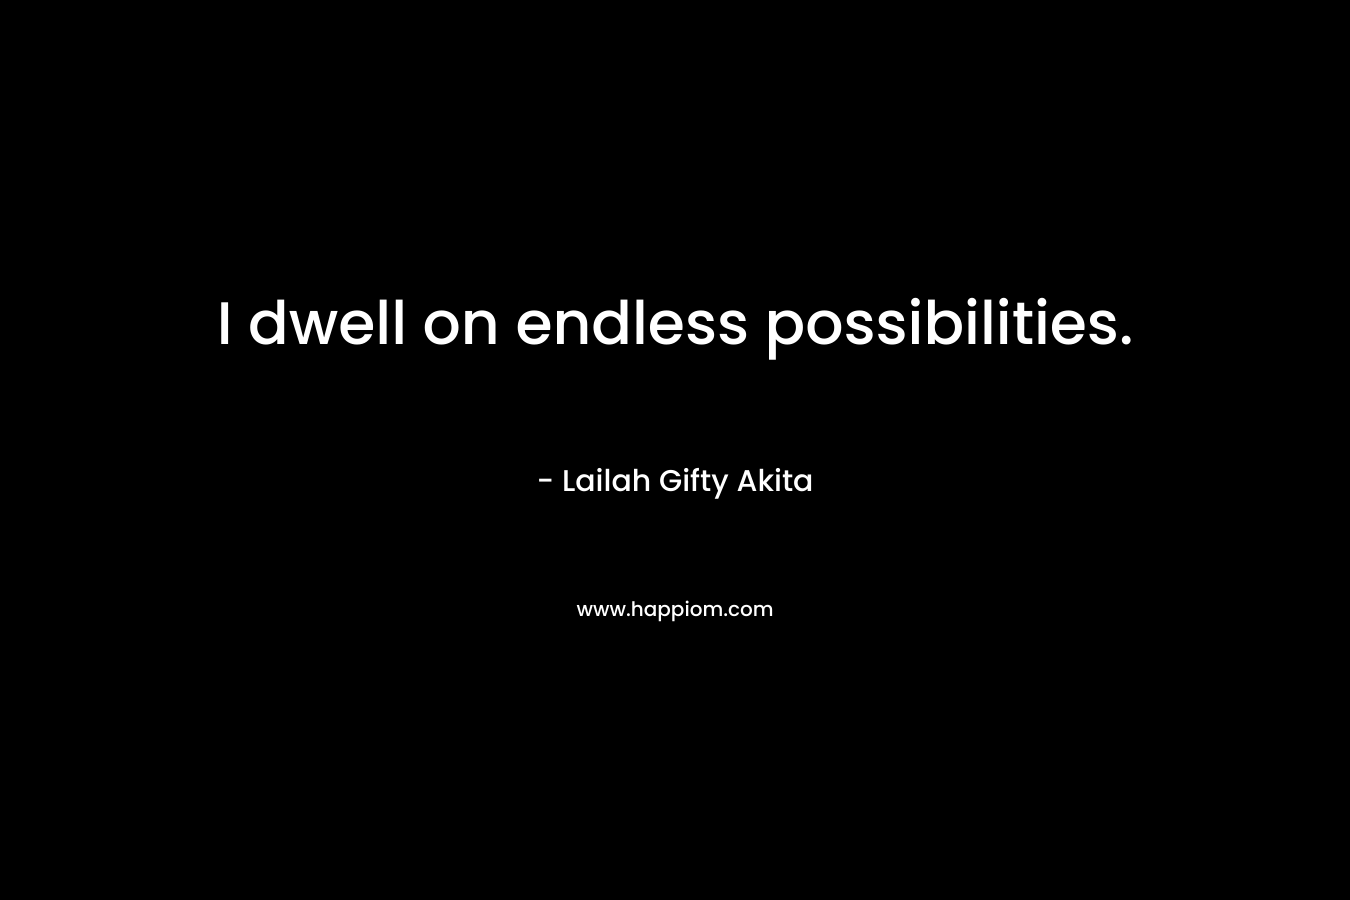 I dwell on endless possibilities.